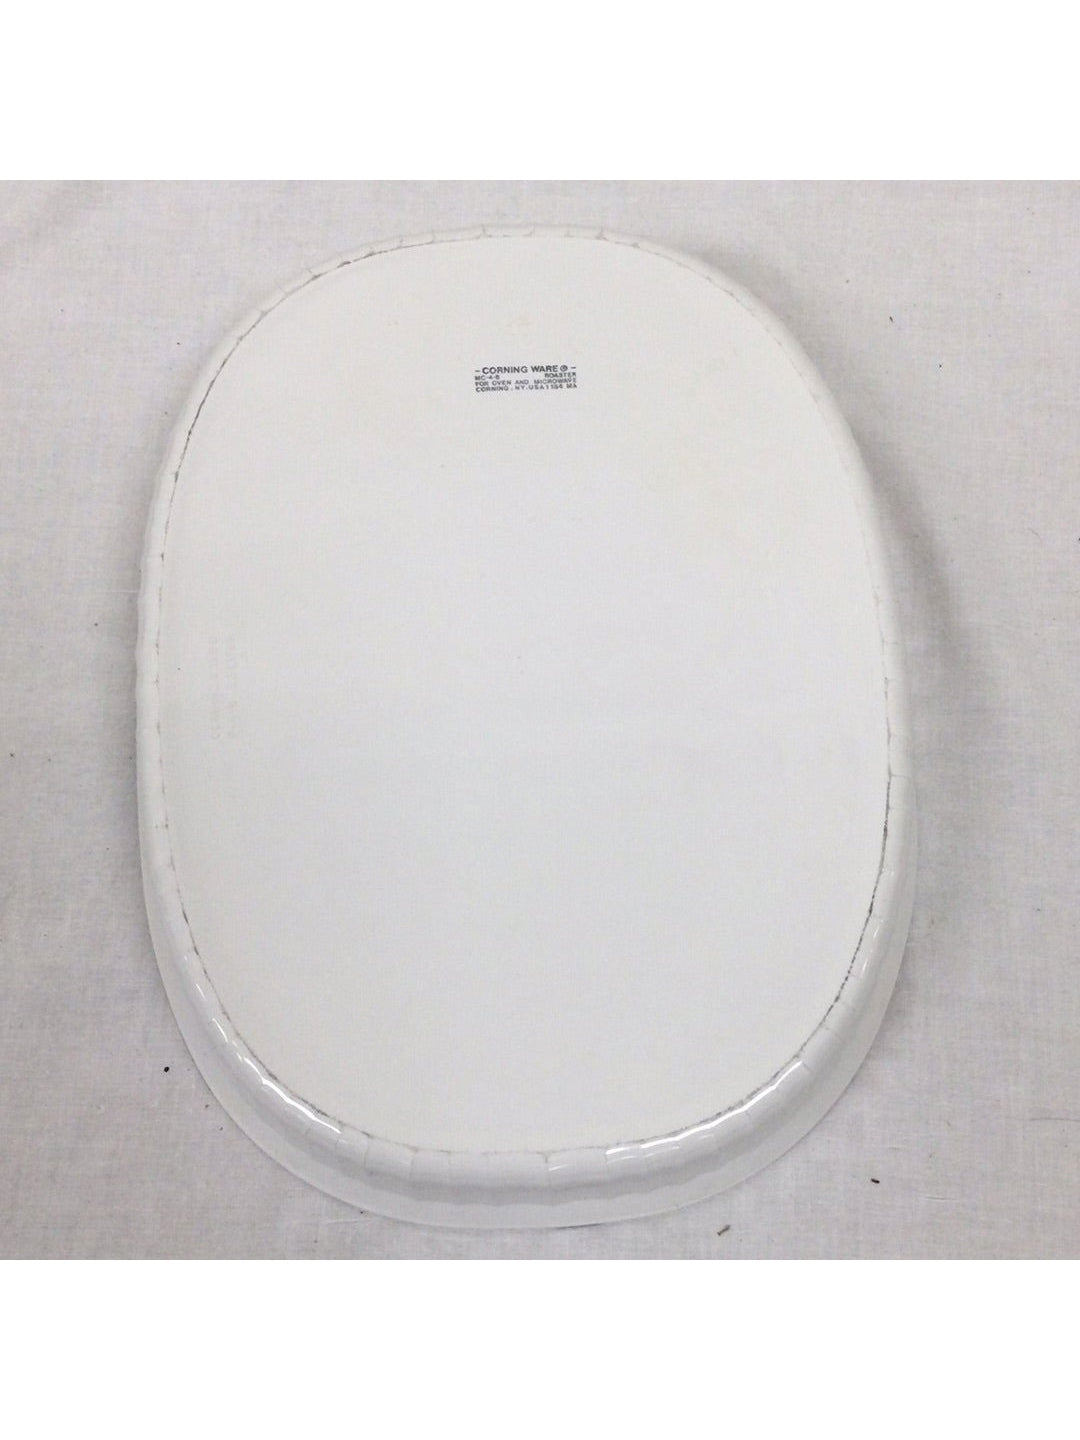 Corning Ware Oval Casserole Dish - The Kennedy Collective Thrift - 